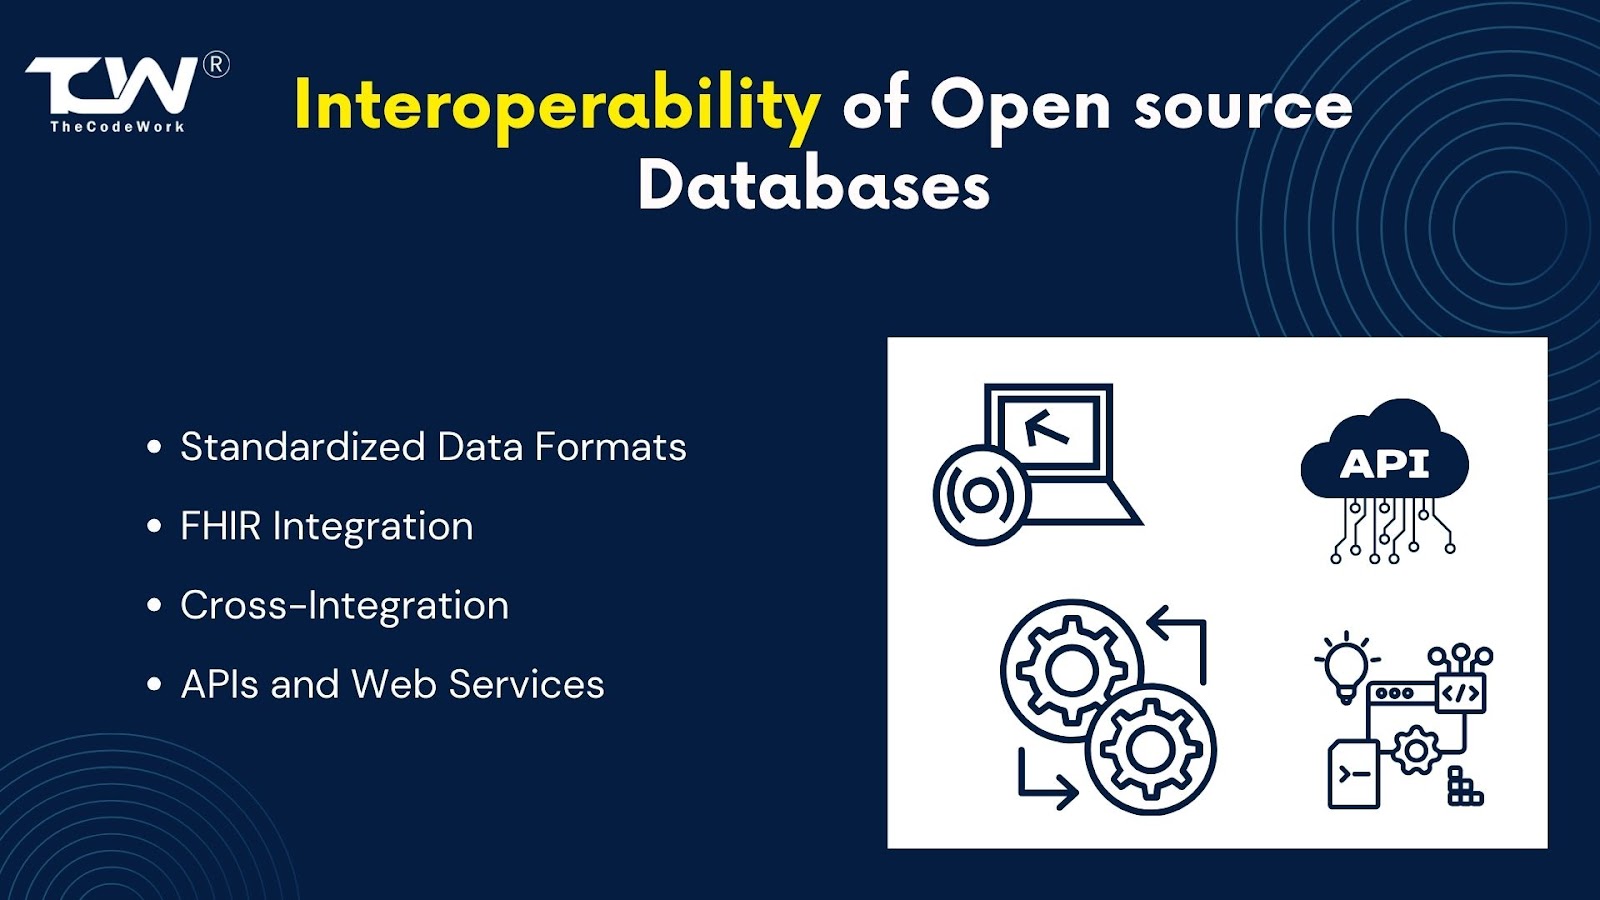 Interoperability of Open source Databases with existing systems